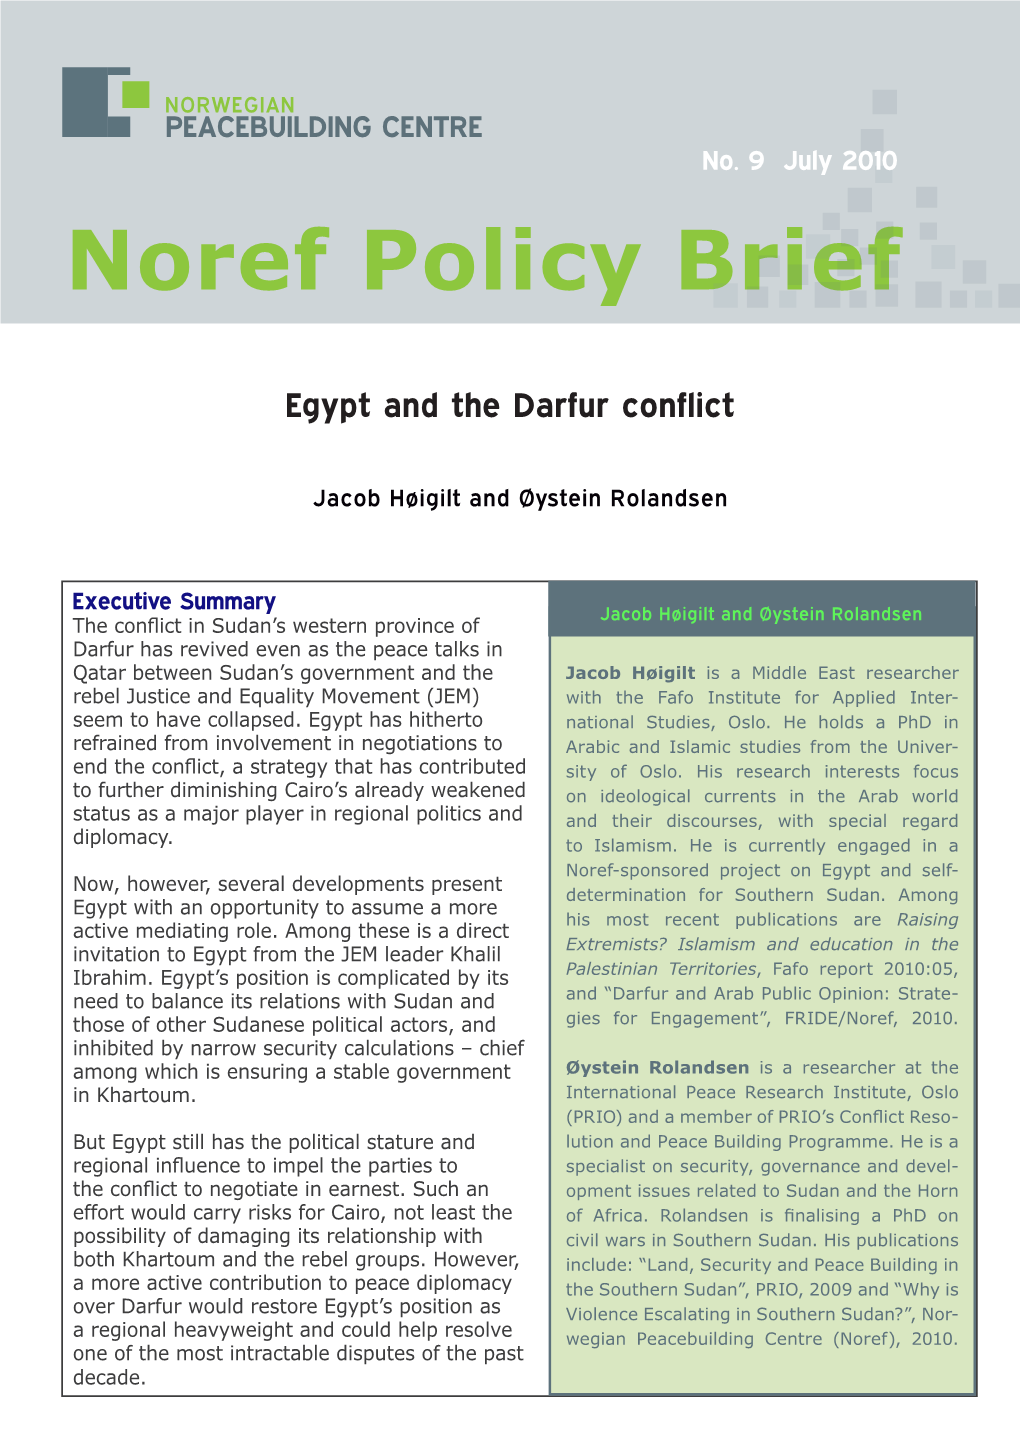 Egypt and the Darfur Conflict